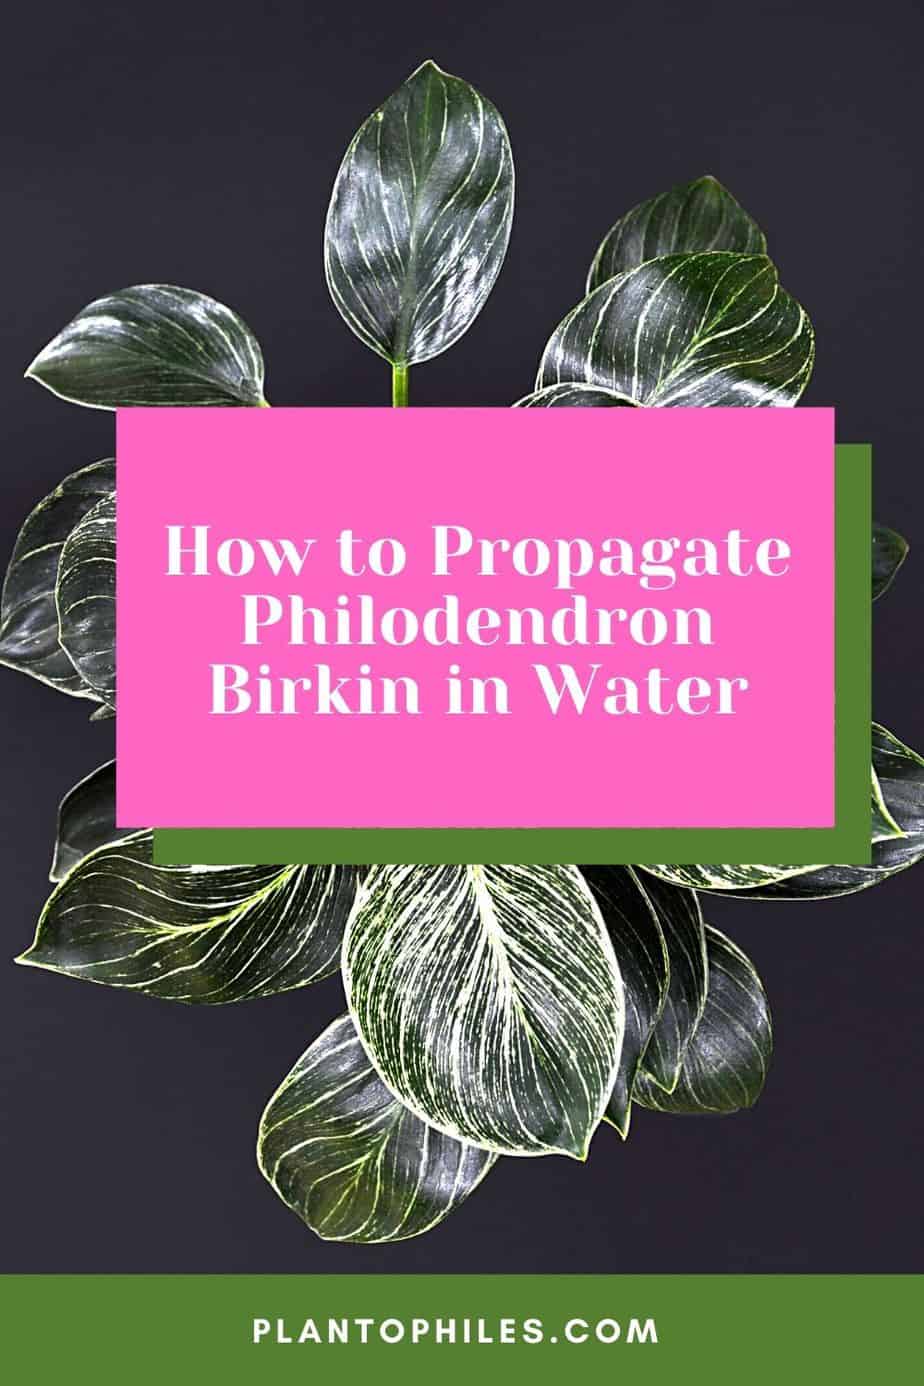 How to Propagate Philodendron Birkin in Water